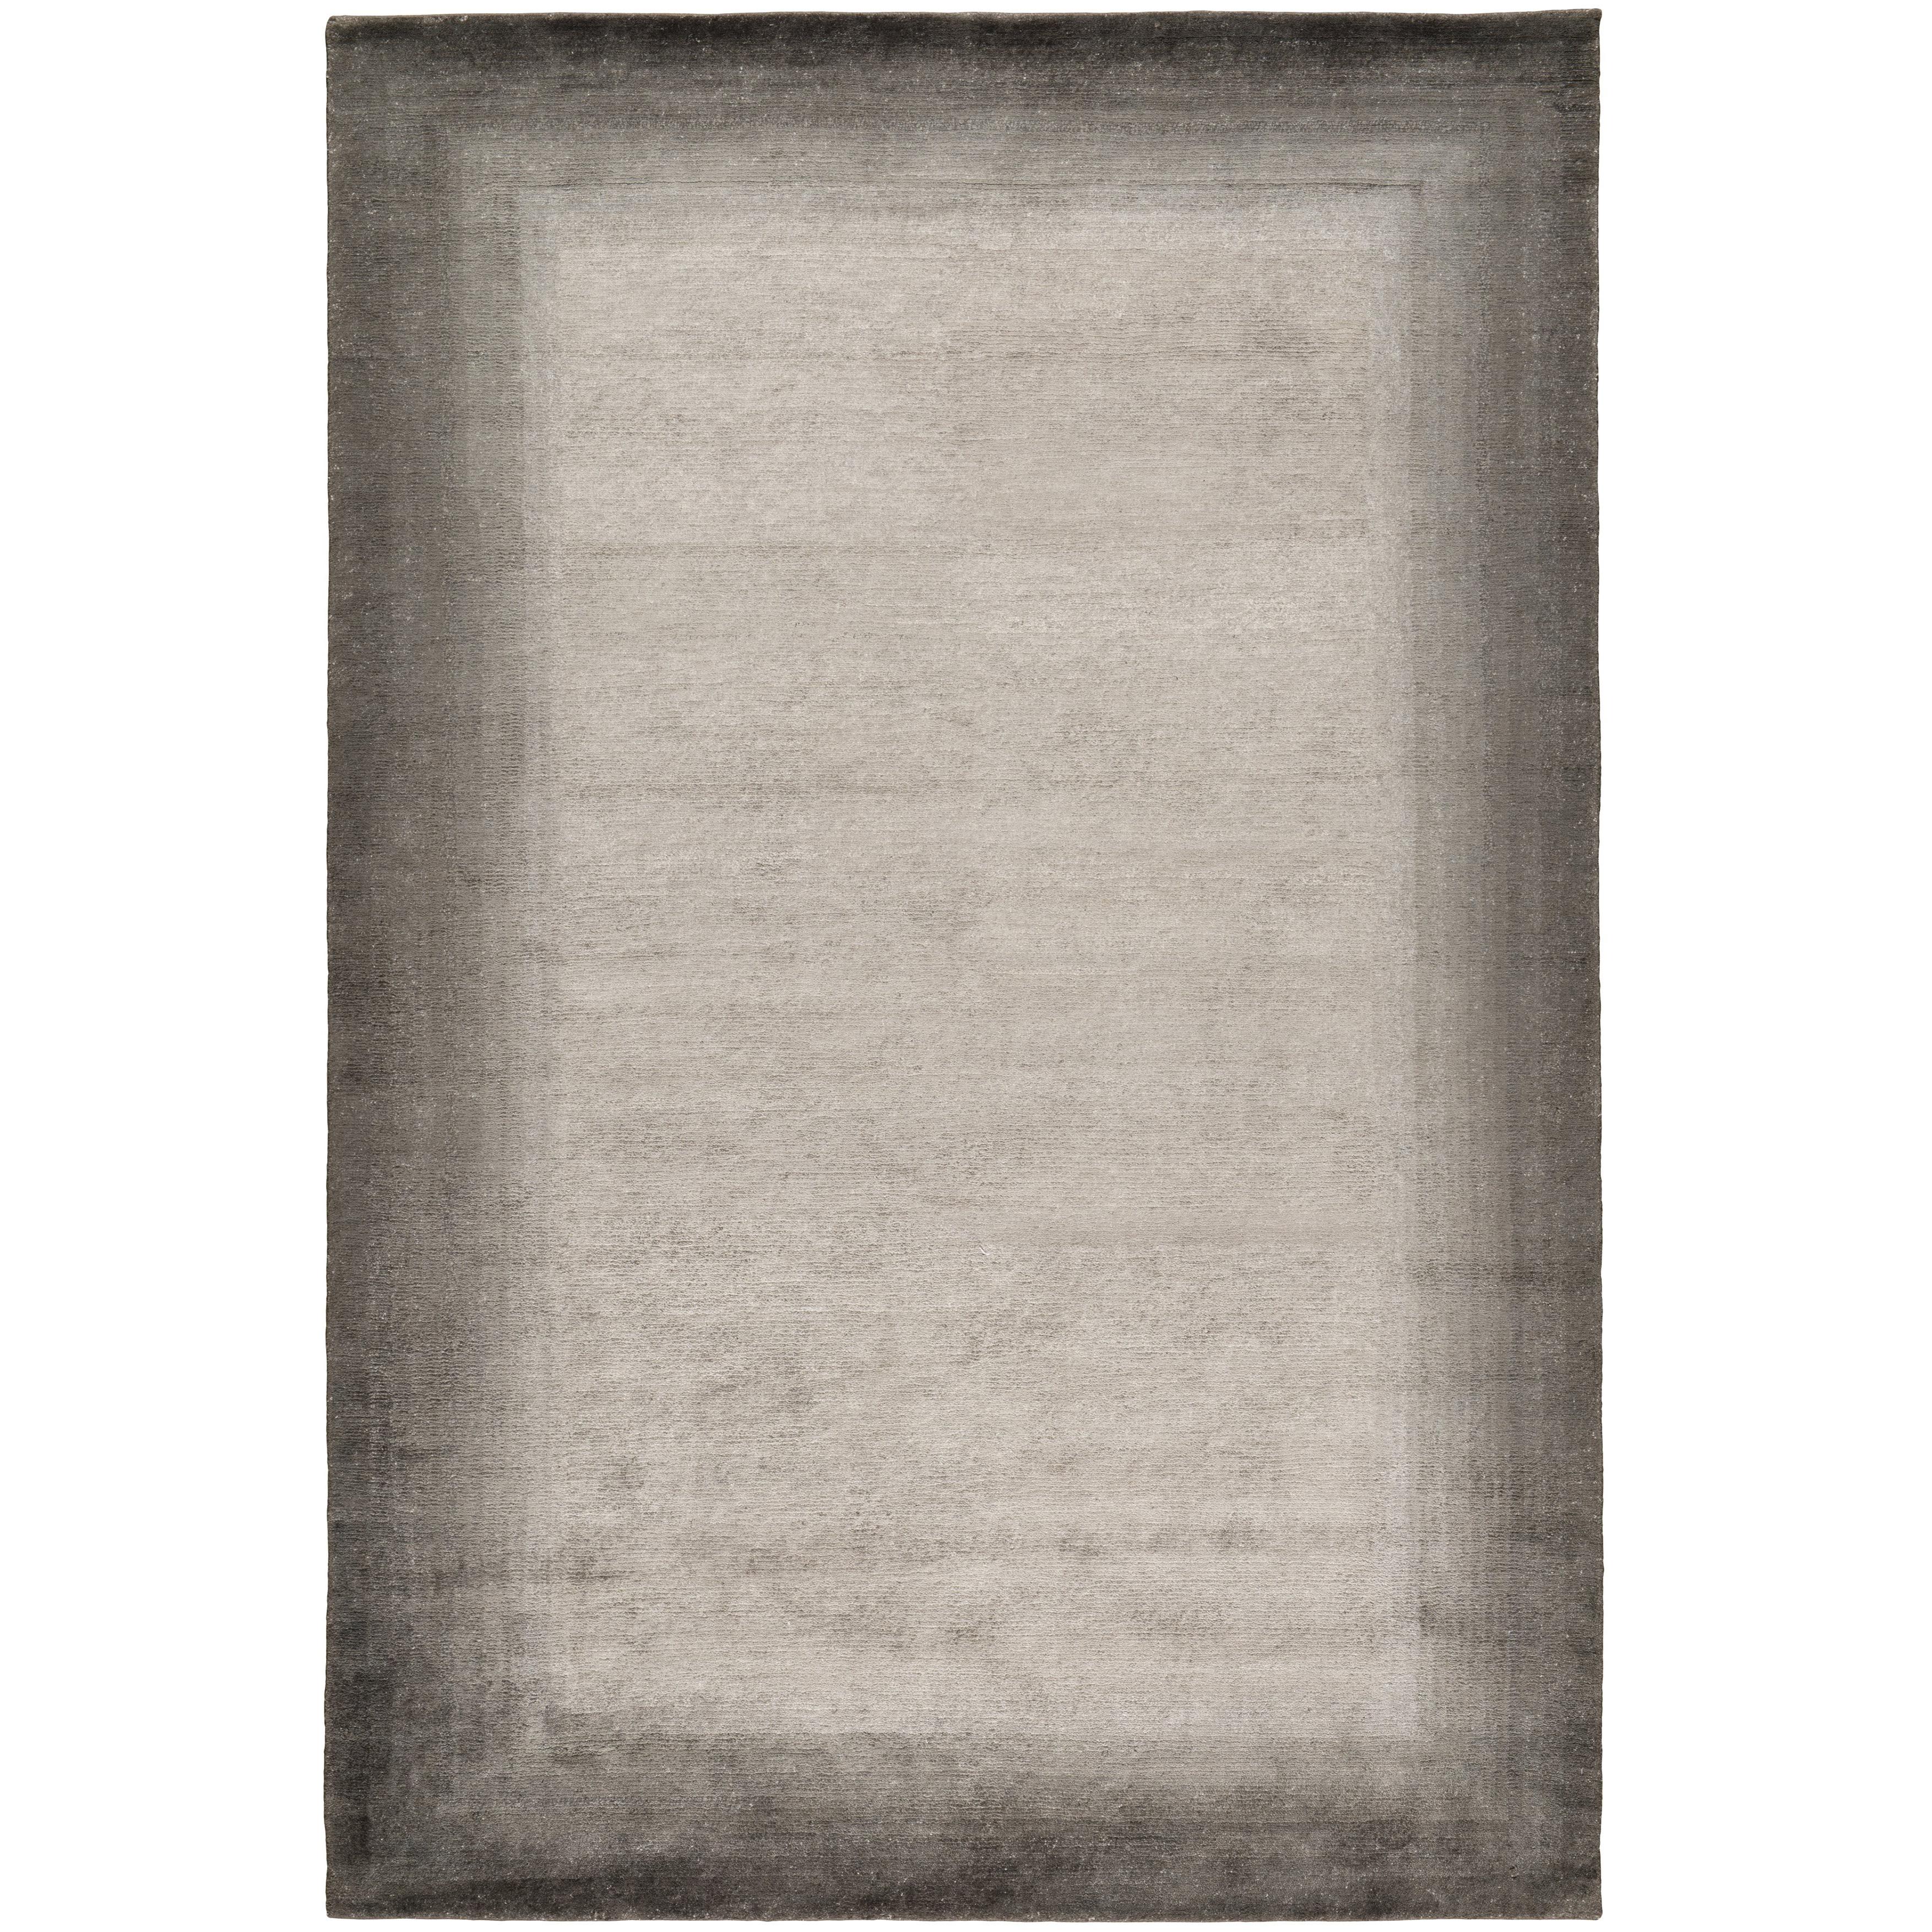 Bamboo Border Charcoal 10x8 Rug in Bamboo Yarn by The Rug Company For Sale